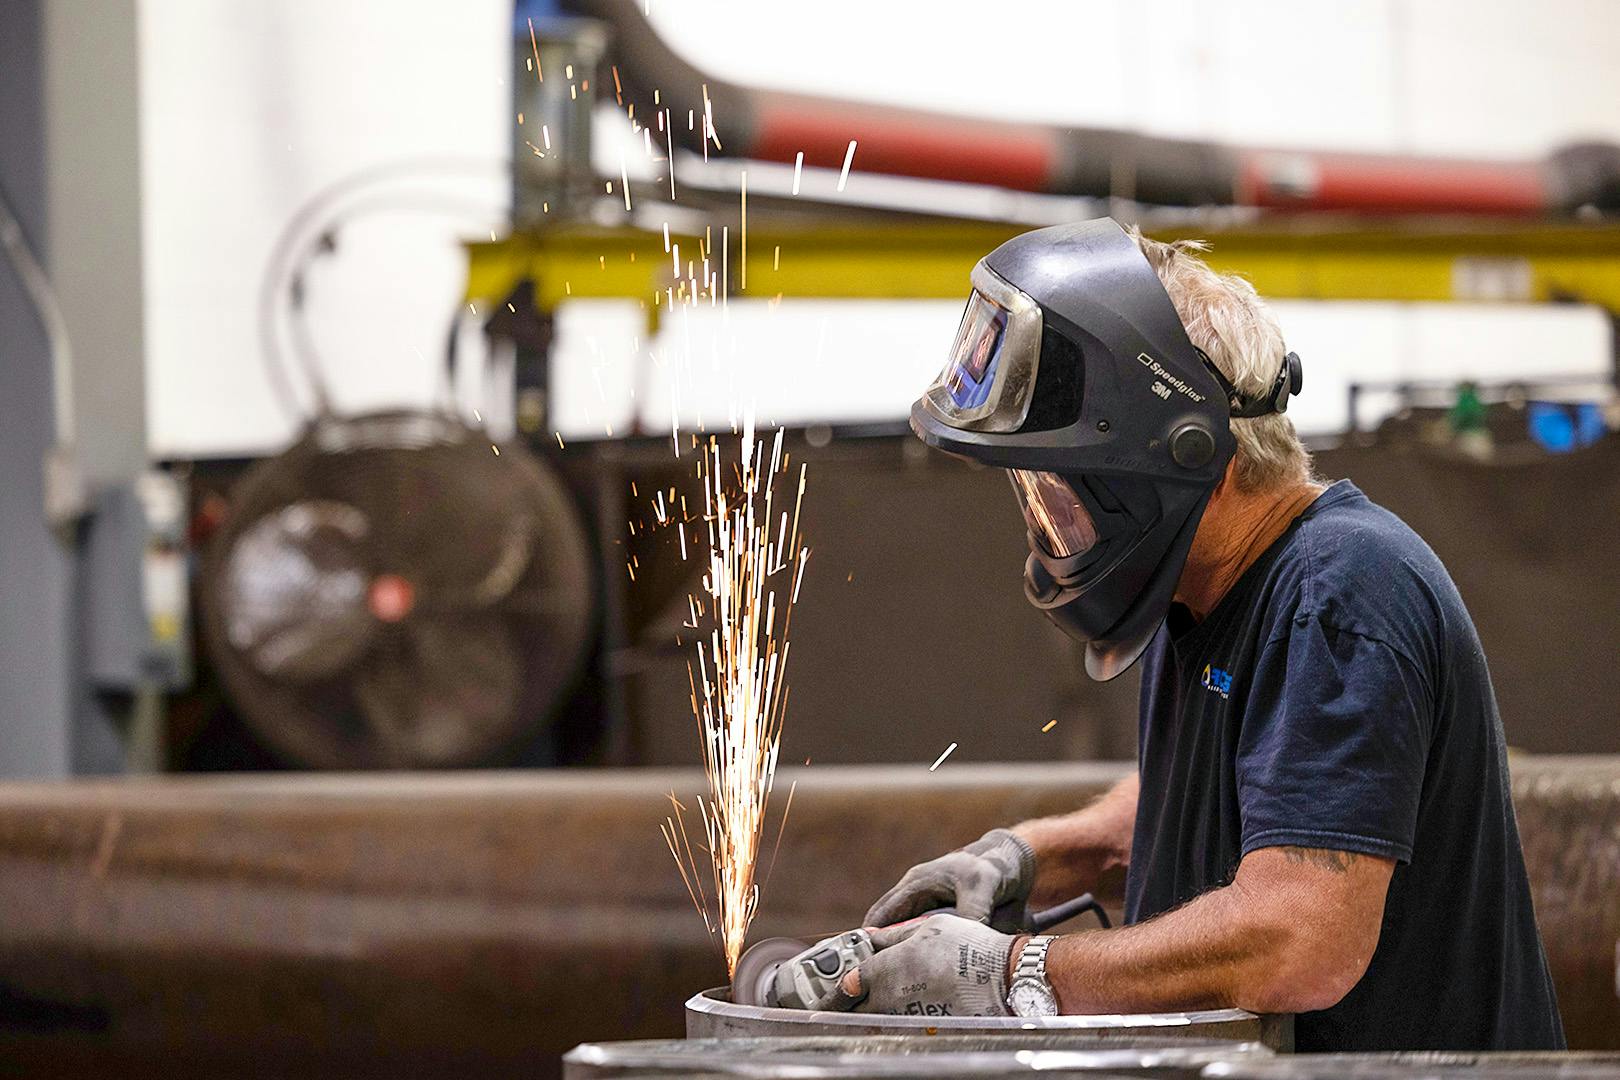 Man welding a piece of metal with sparks flying up near his face mask